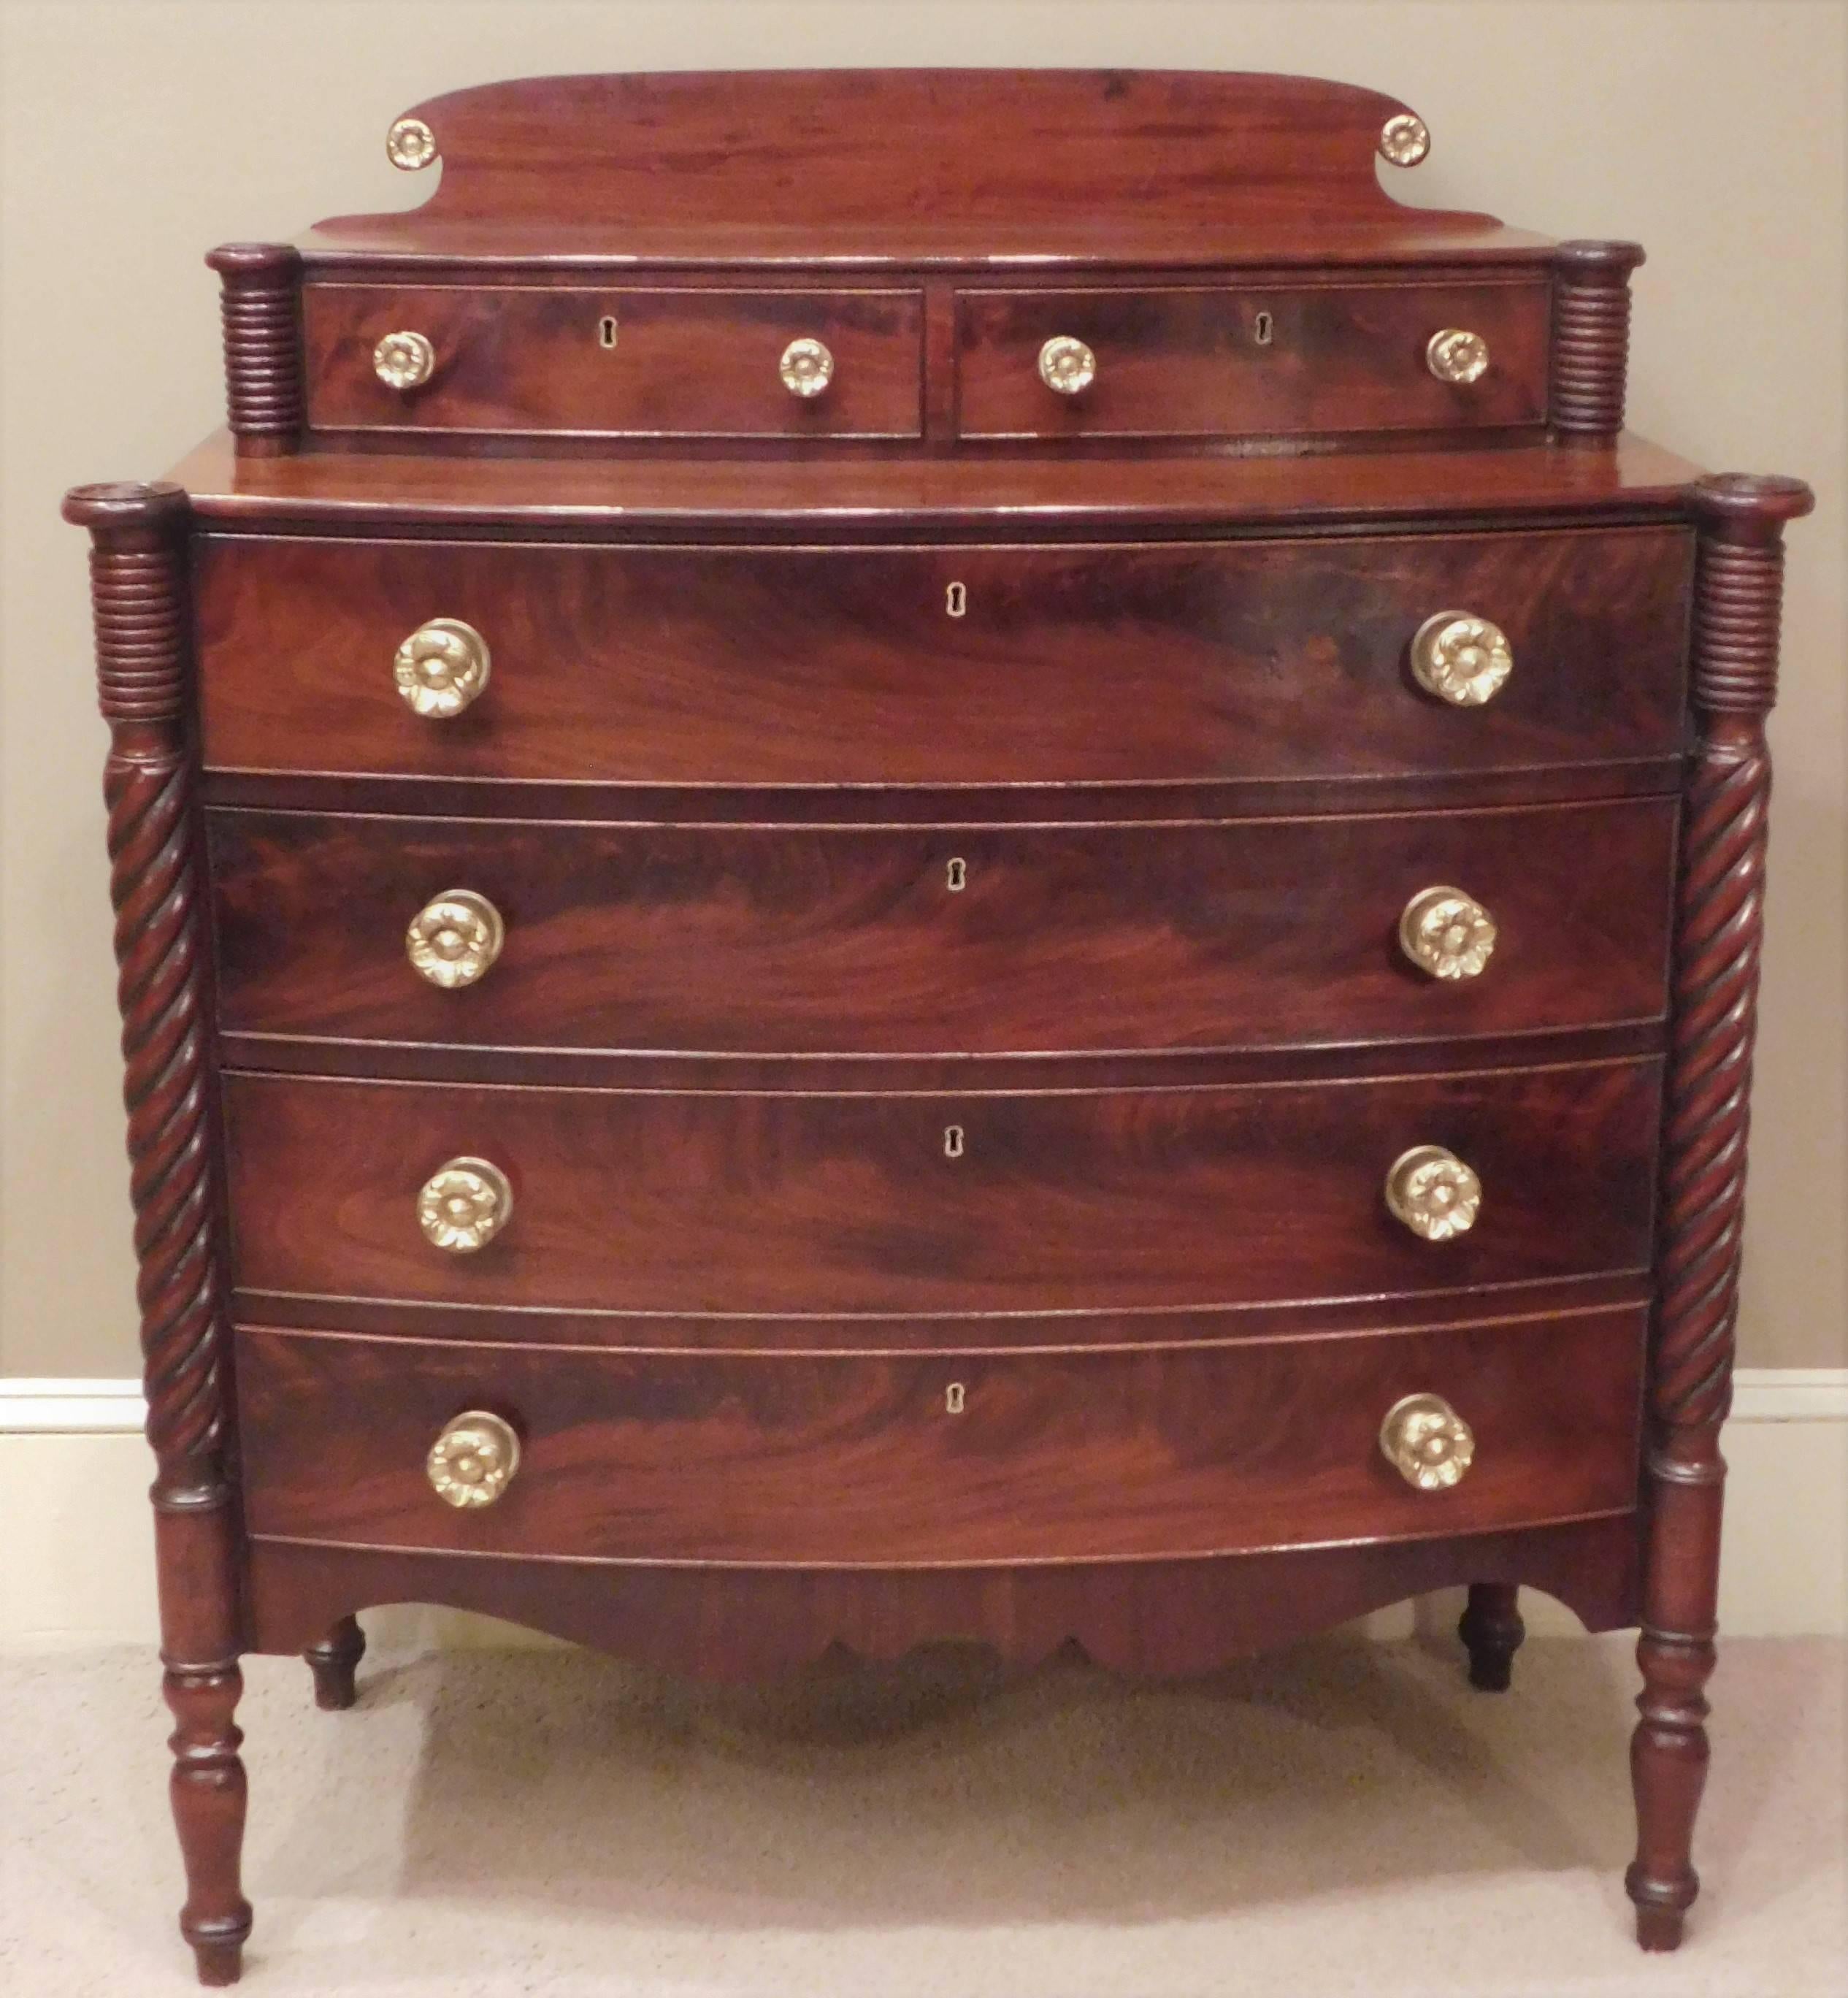 This Sheraton chest is French polished mahogany and mahogany veneer with pine and poplar secondary woods. The hand-cast brass hardware is replaced. The Federal chest has two over four drawers.
 